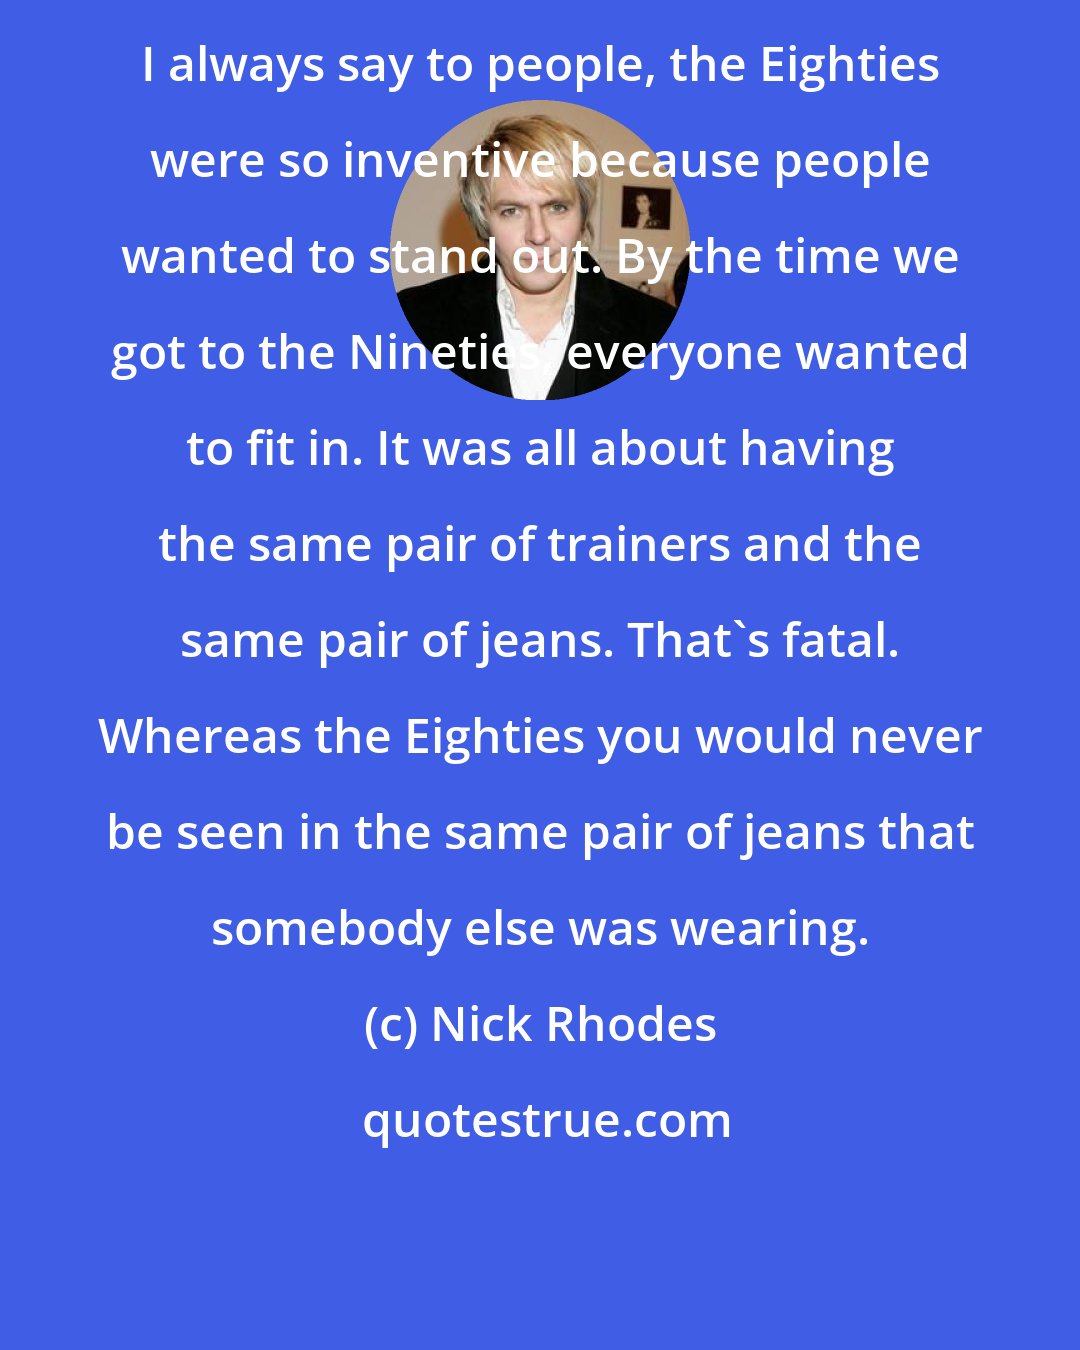 Nick Rhodes: I always say to people, the Eighties were so inventive because people wanted to stand out. By the time we got to the Nineties, everyone wanted to fit in. It was all about having the same pair of trainers and the same pair of jeans. That's fatal. Whereas the Eighties you would never be seen in the same pair of jeans that somebody else was wearing.